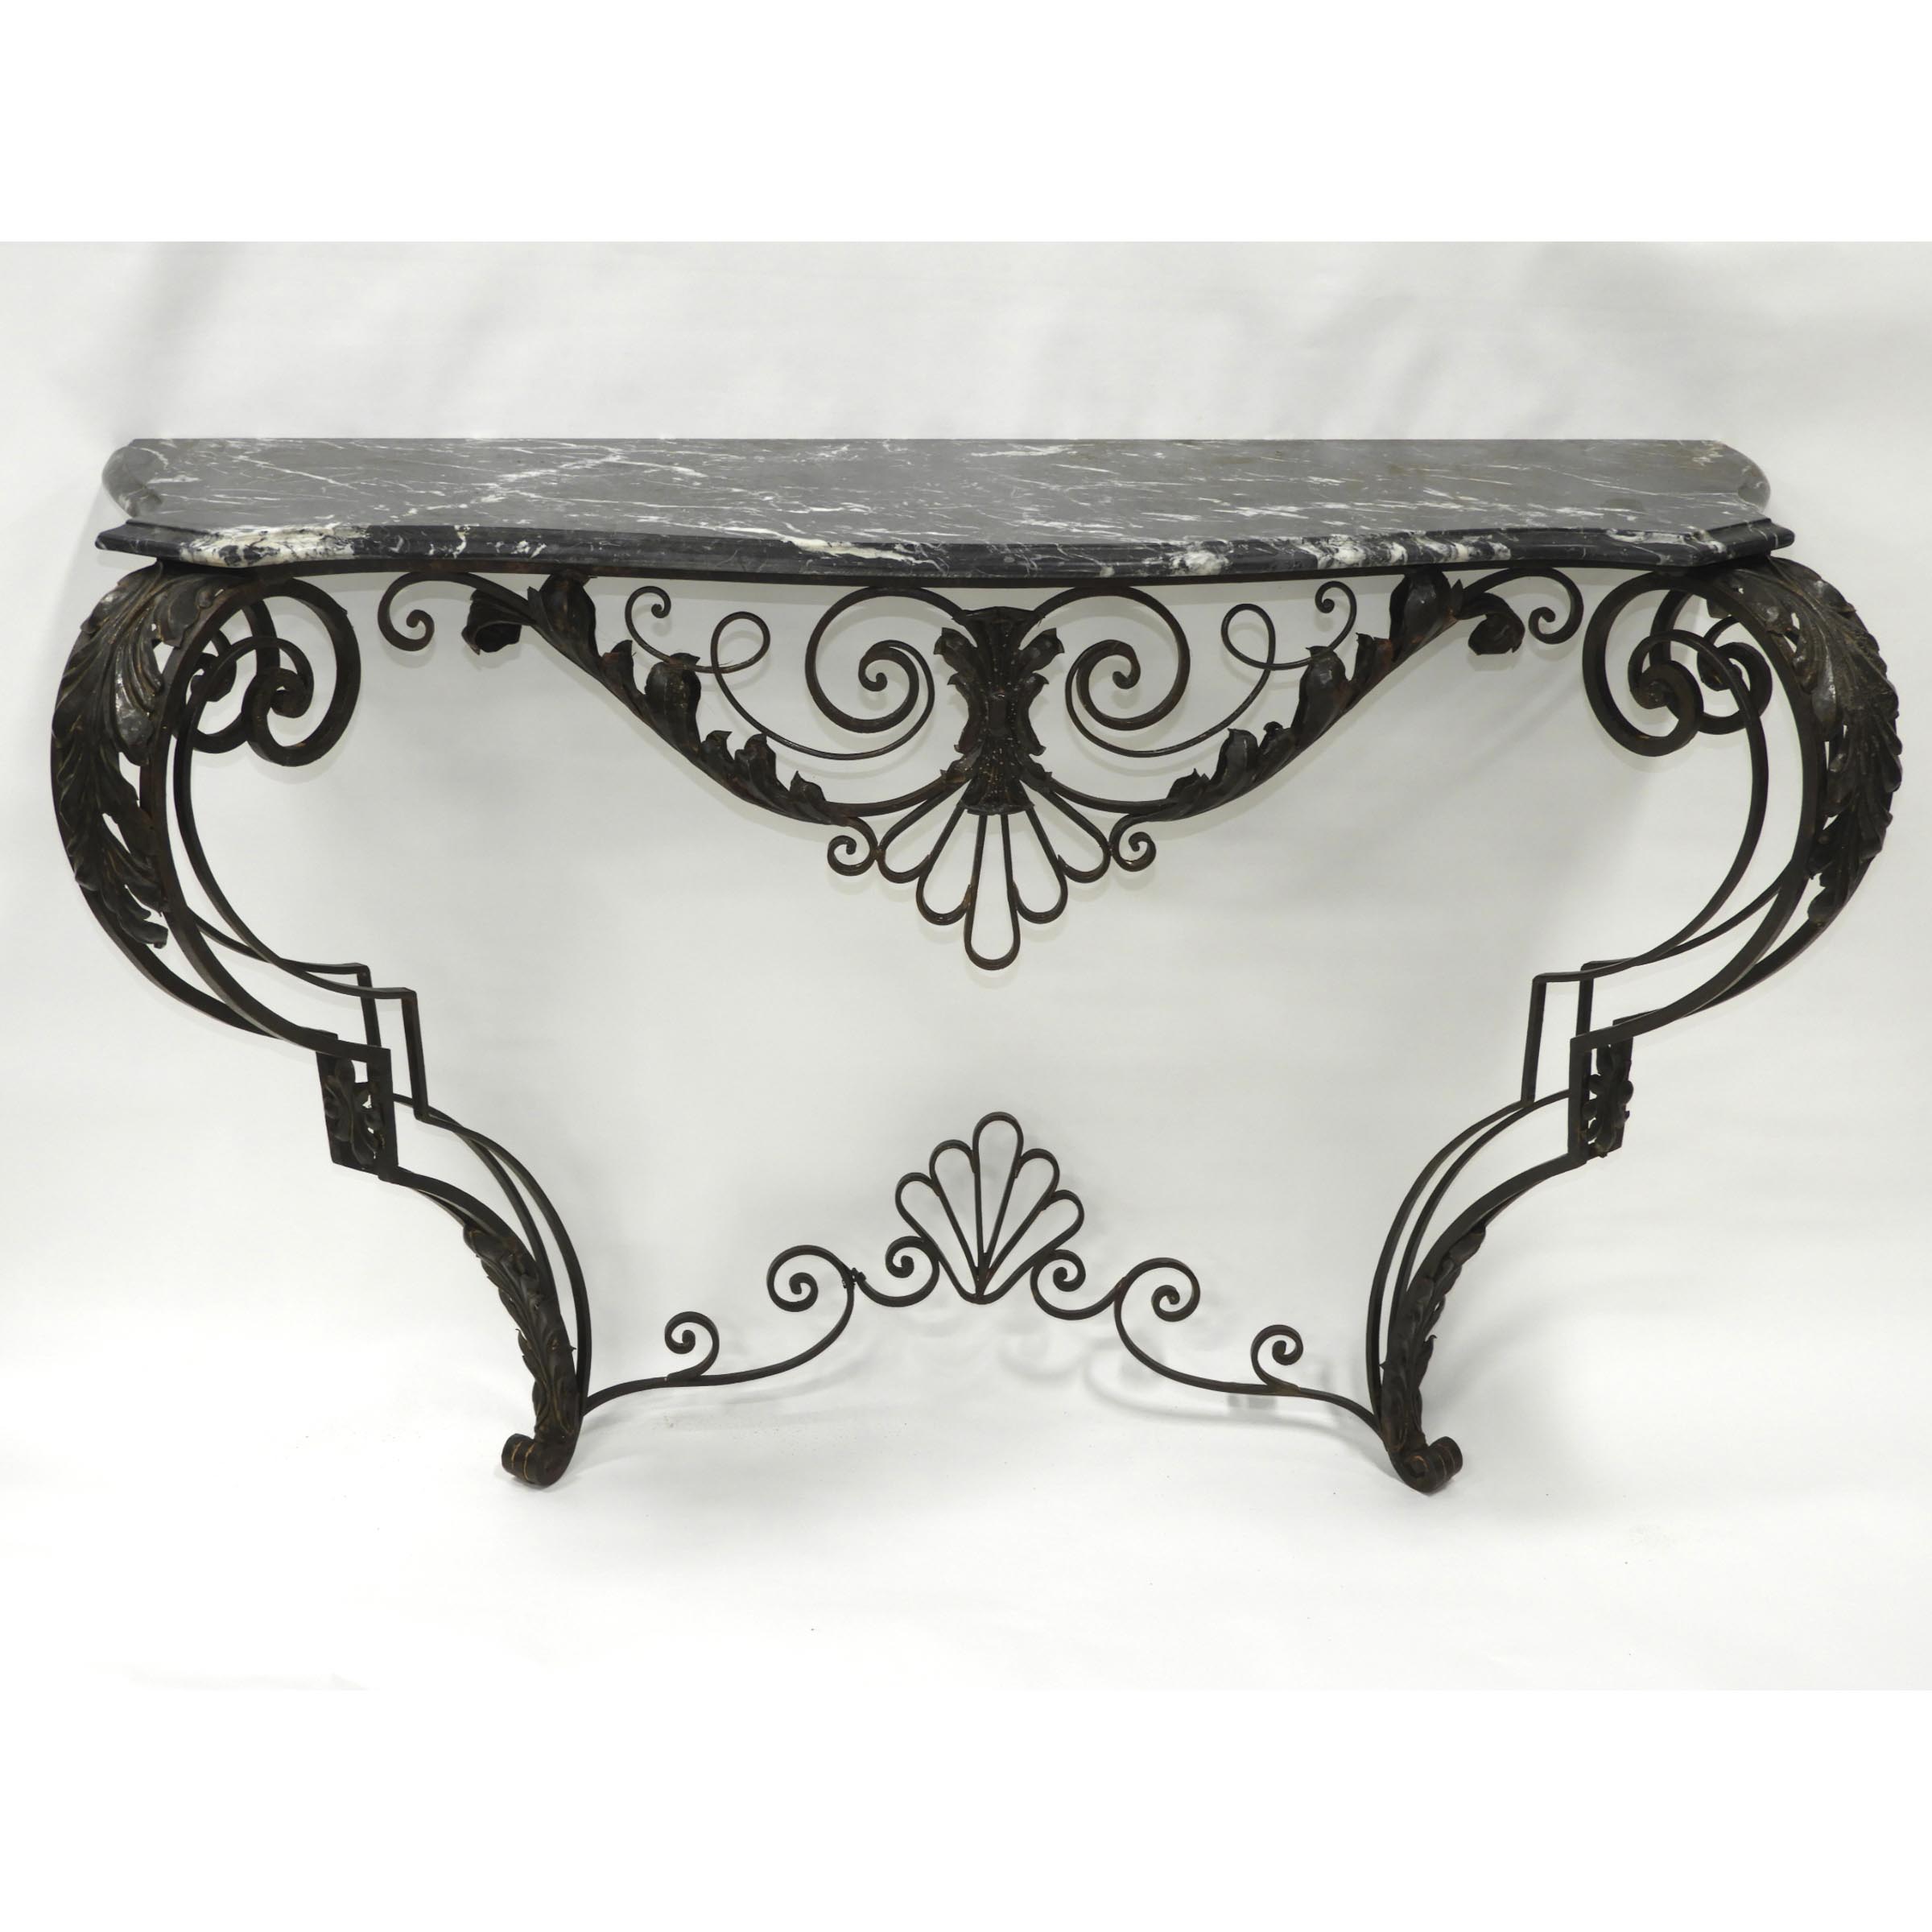 Spanish Wrought Iron Console Table, early 20th century